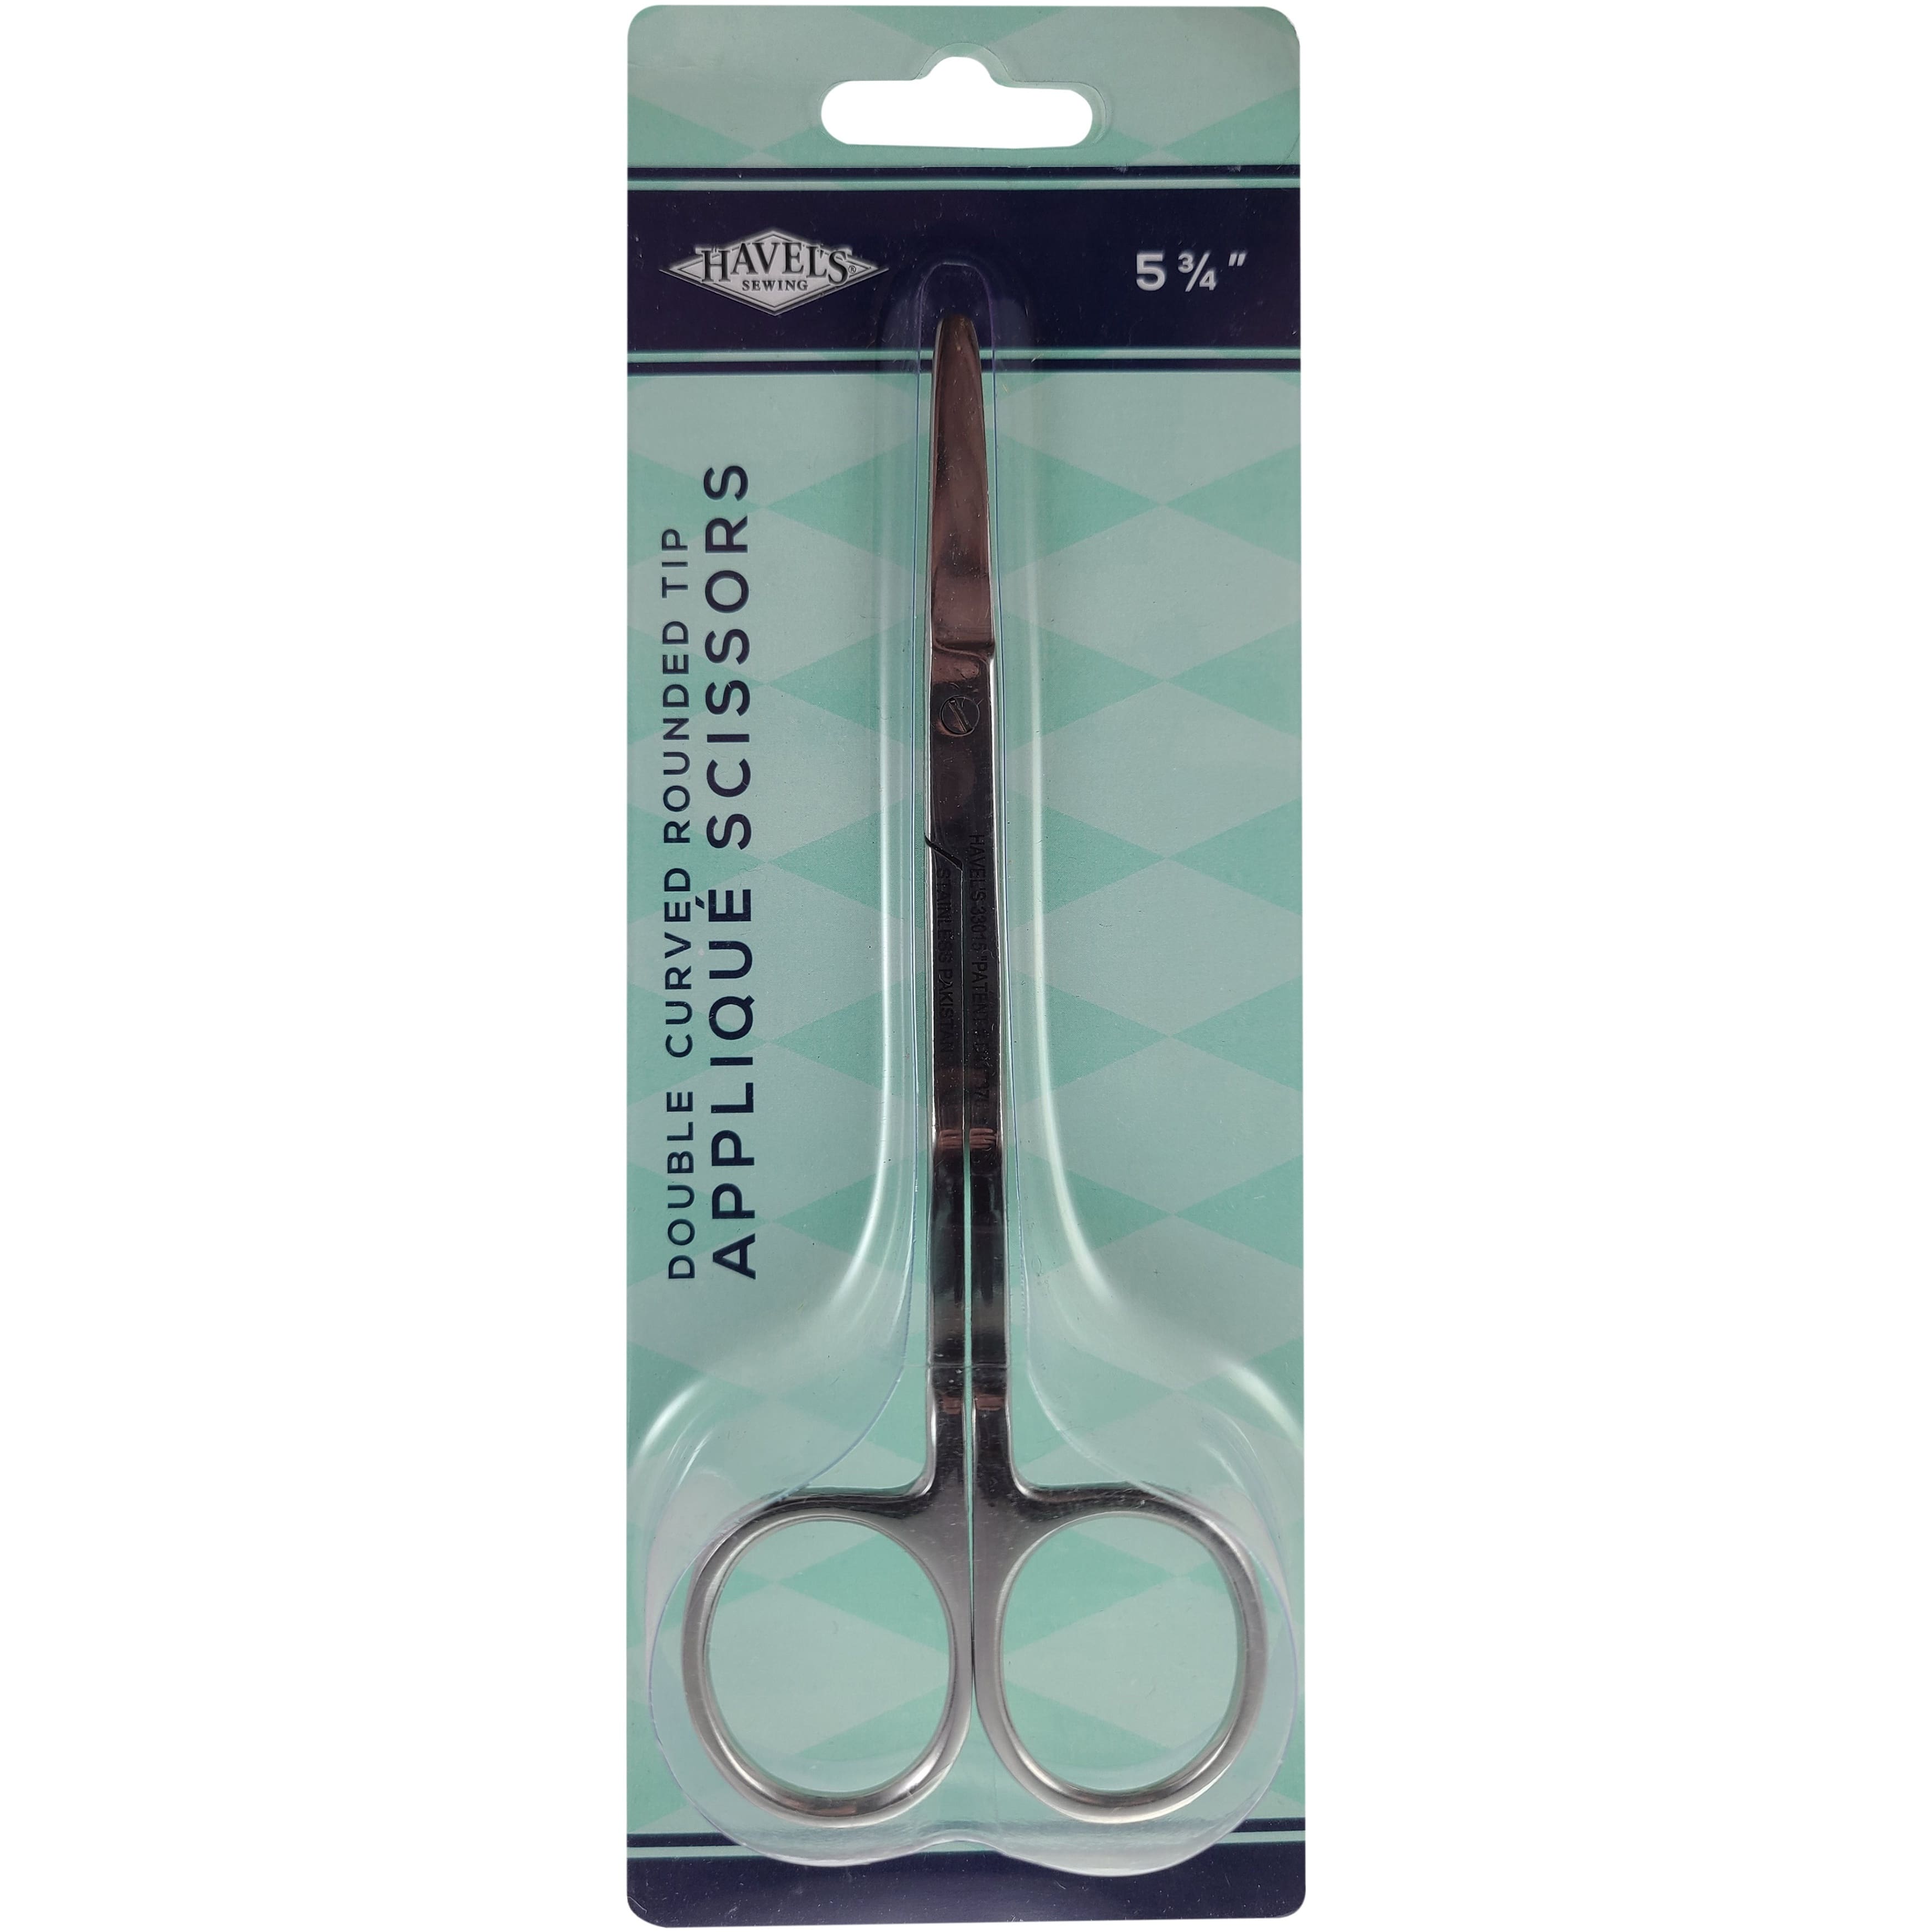  Embroiderymaterial Sewing Snips Thread Cutter Scissors Pack of  2 Pieces (Teal)